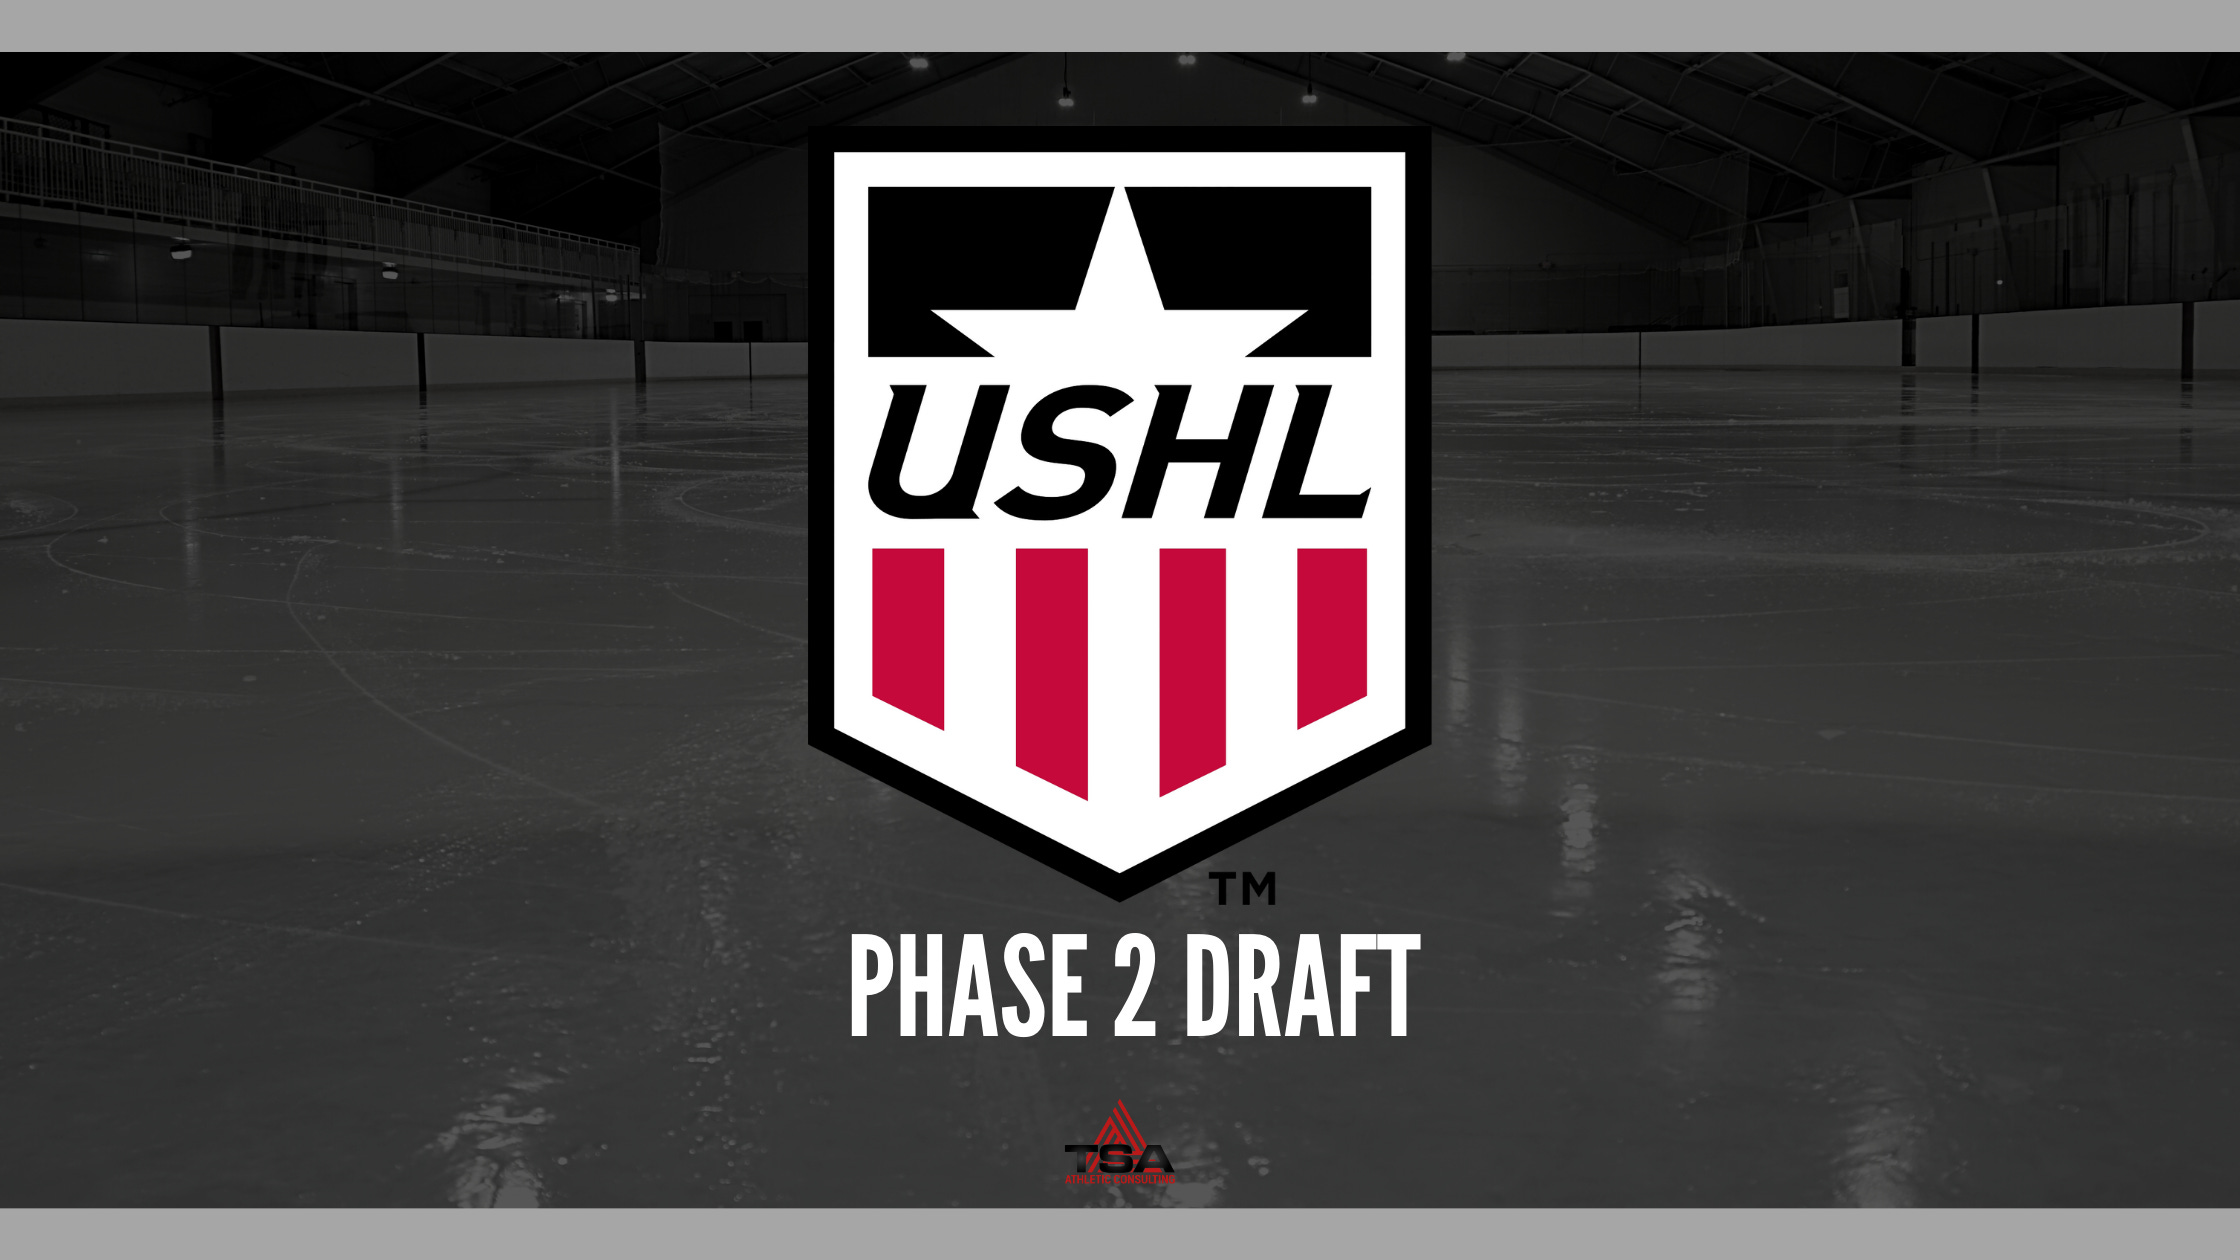 USPHLCommitments: South Shore's Allain Prepping For Future With Framingham  State